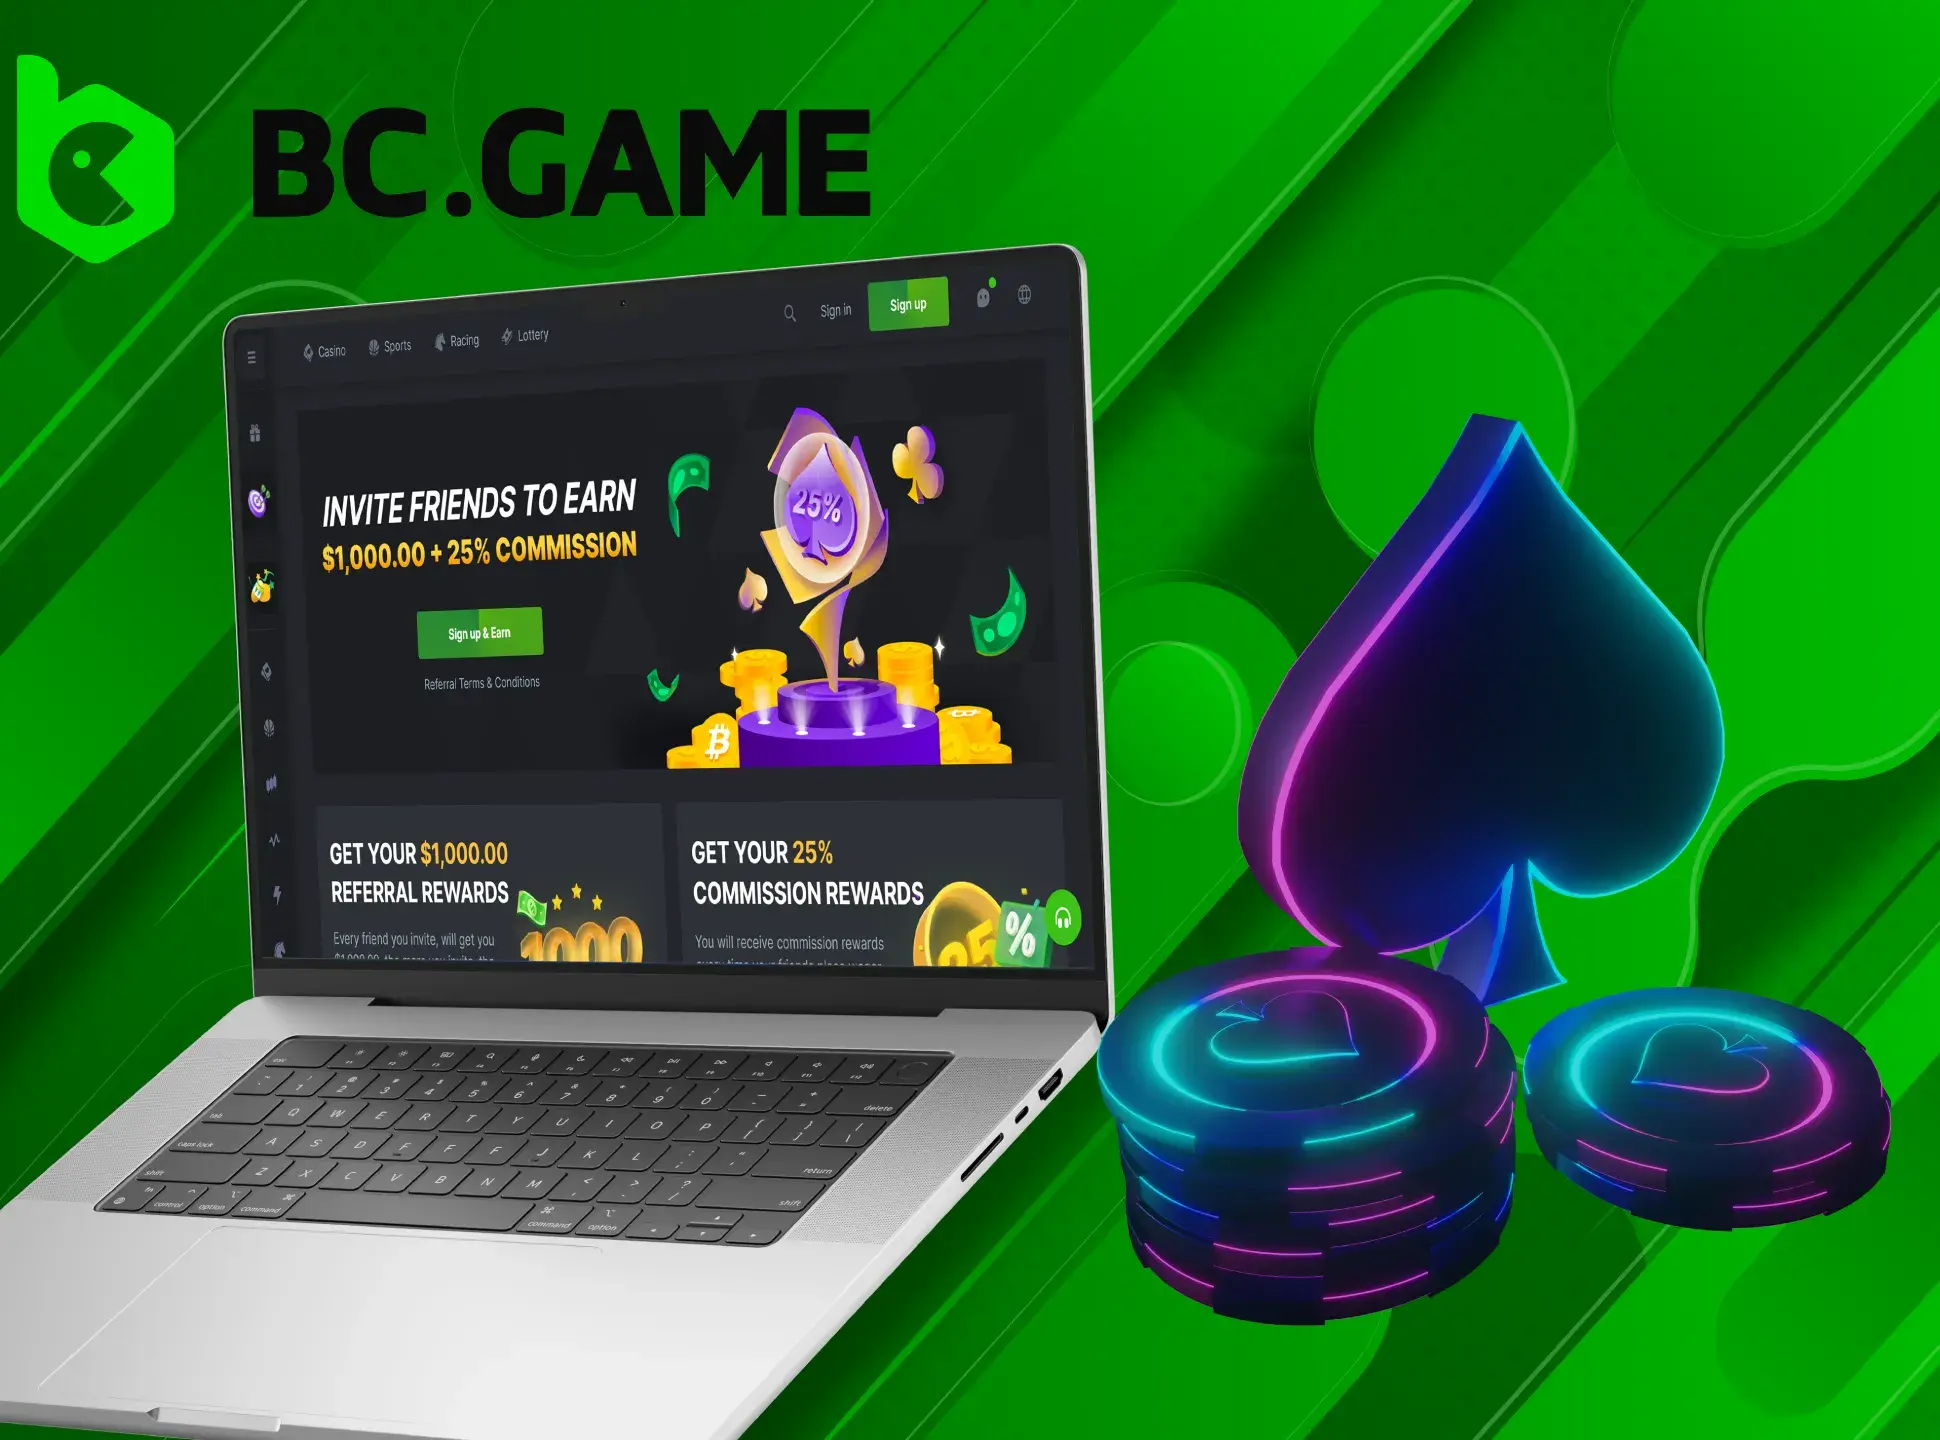 Play together with your friends and acquaintances and get big rewards from BC Game Casino.